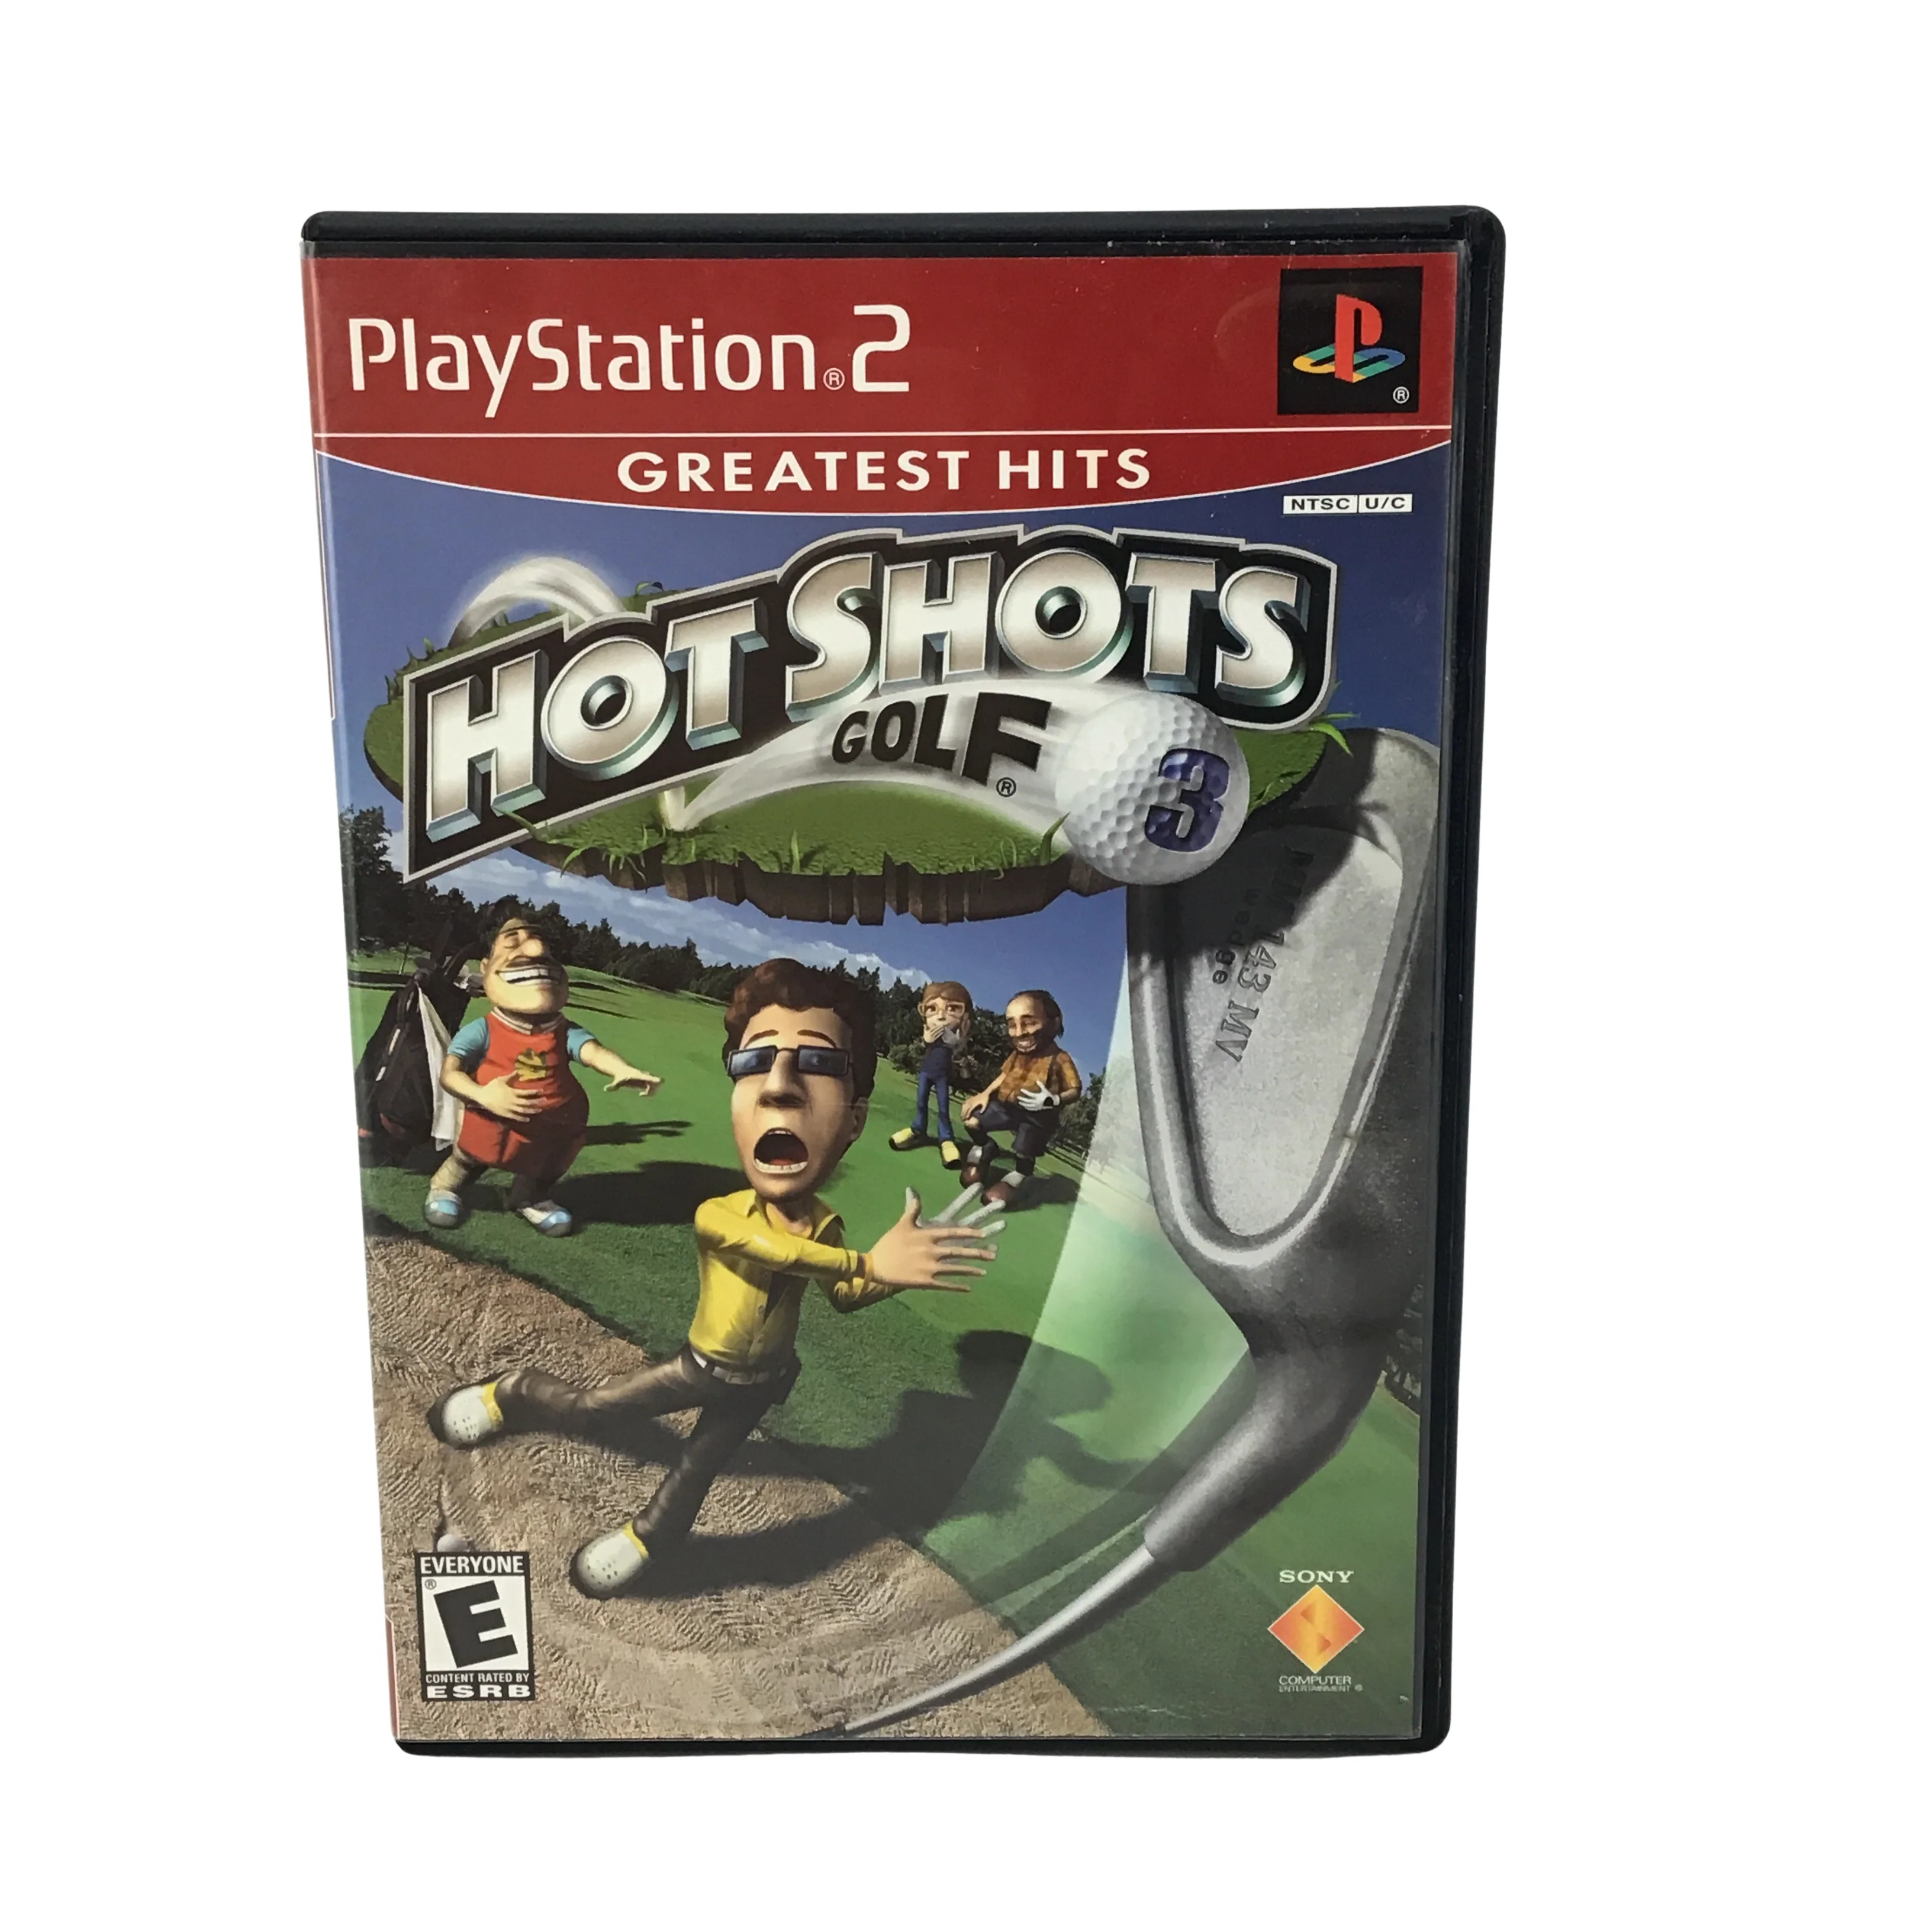 PlayStation 2: Hot Shots Golf 3 Game / Greatest Hits/ Video Game **USED**